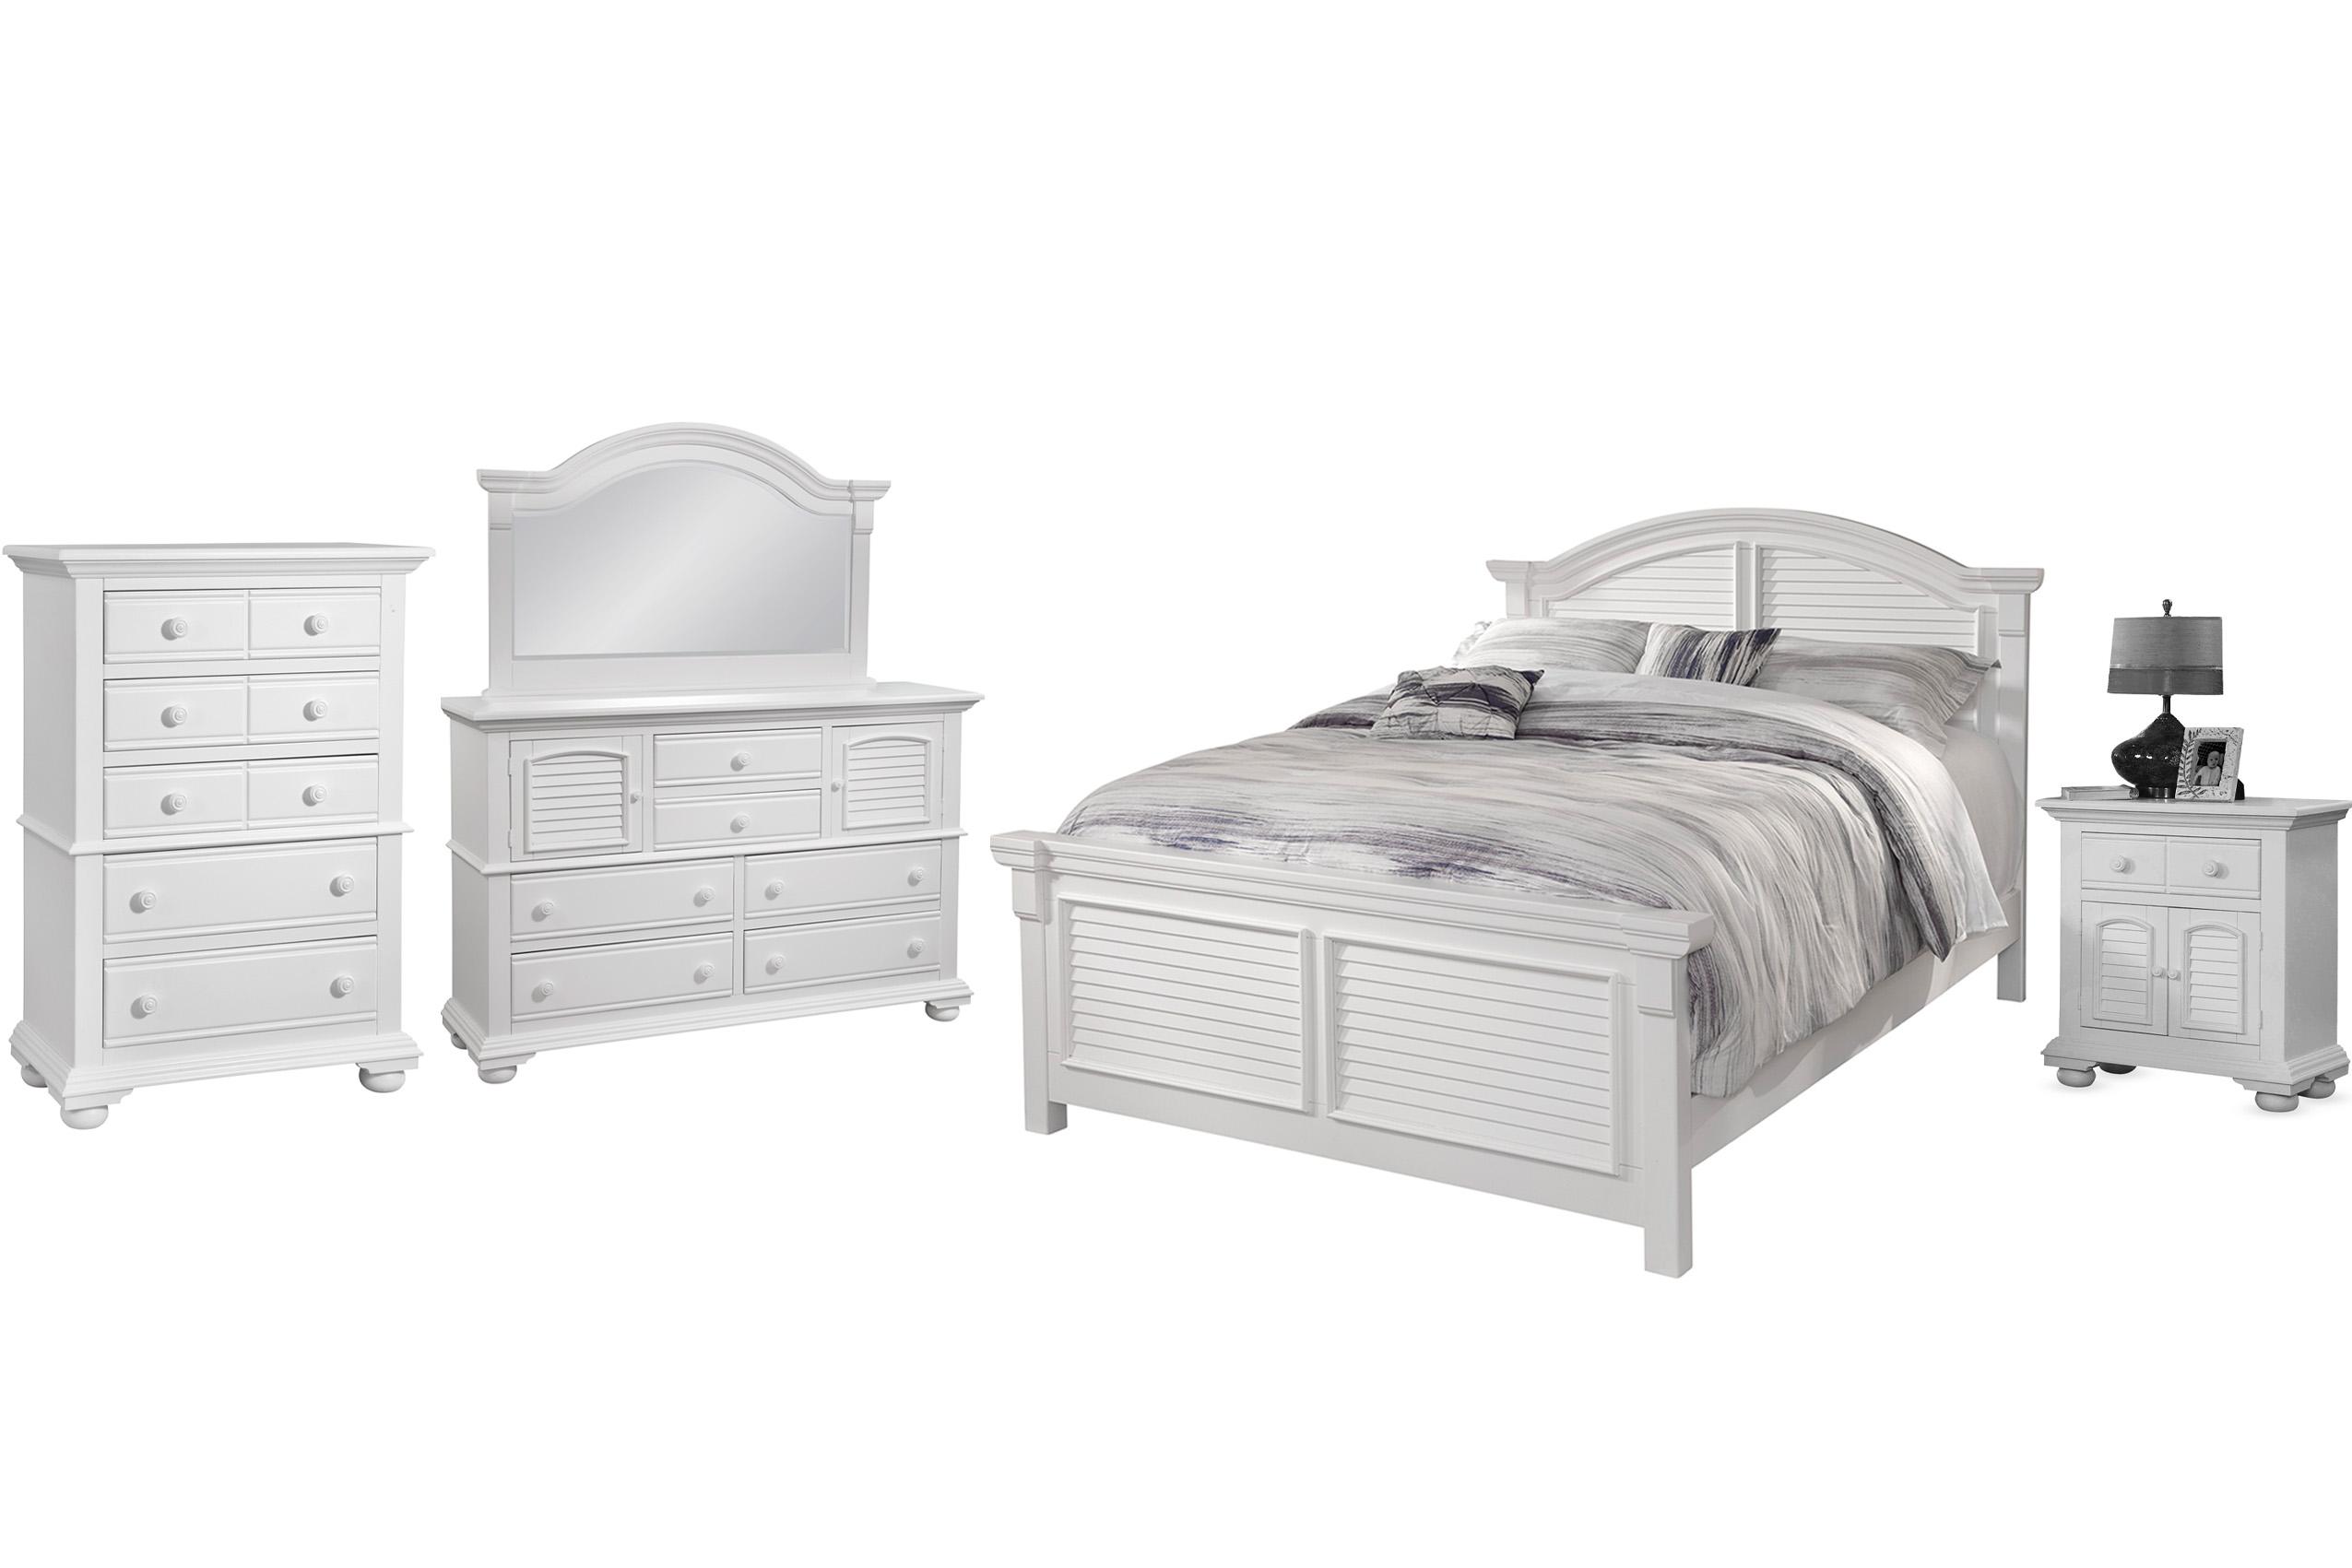 Classic, Traditional, Cottage Panel Bedroom Set COTTAGE 6510-50PAN 6510-QARPN-5PC-Big Way in White 